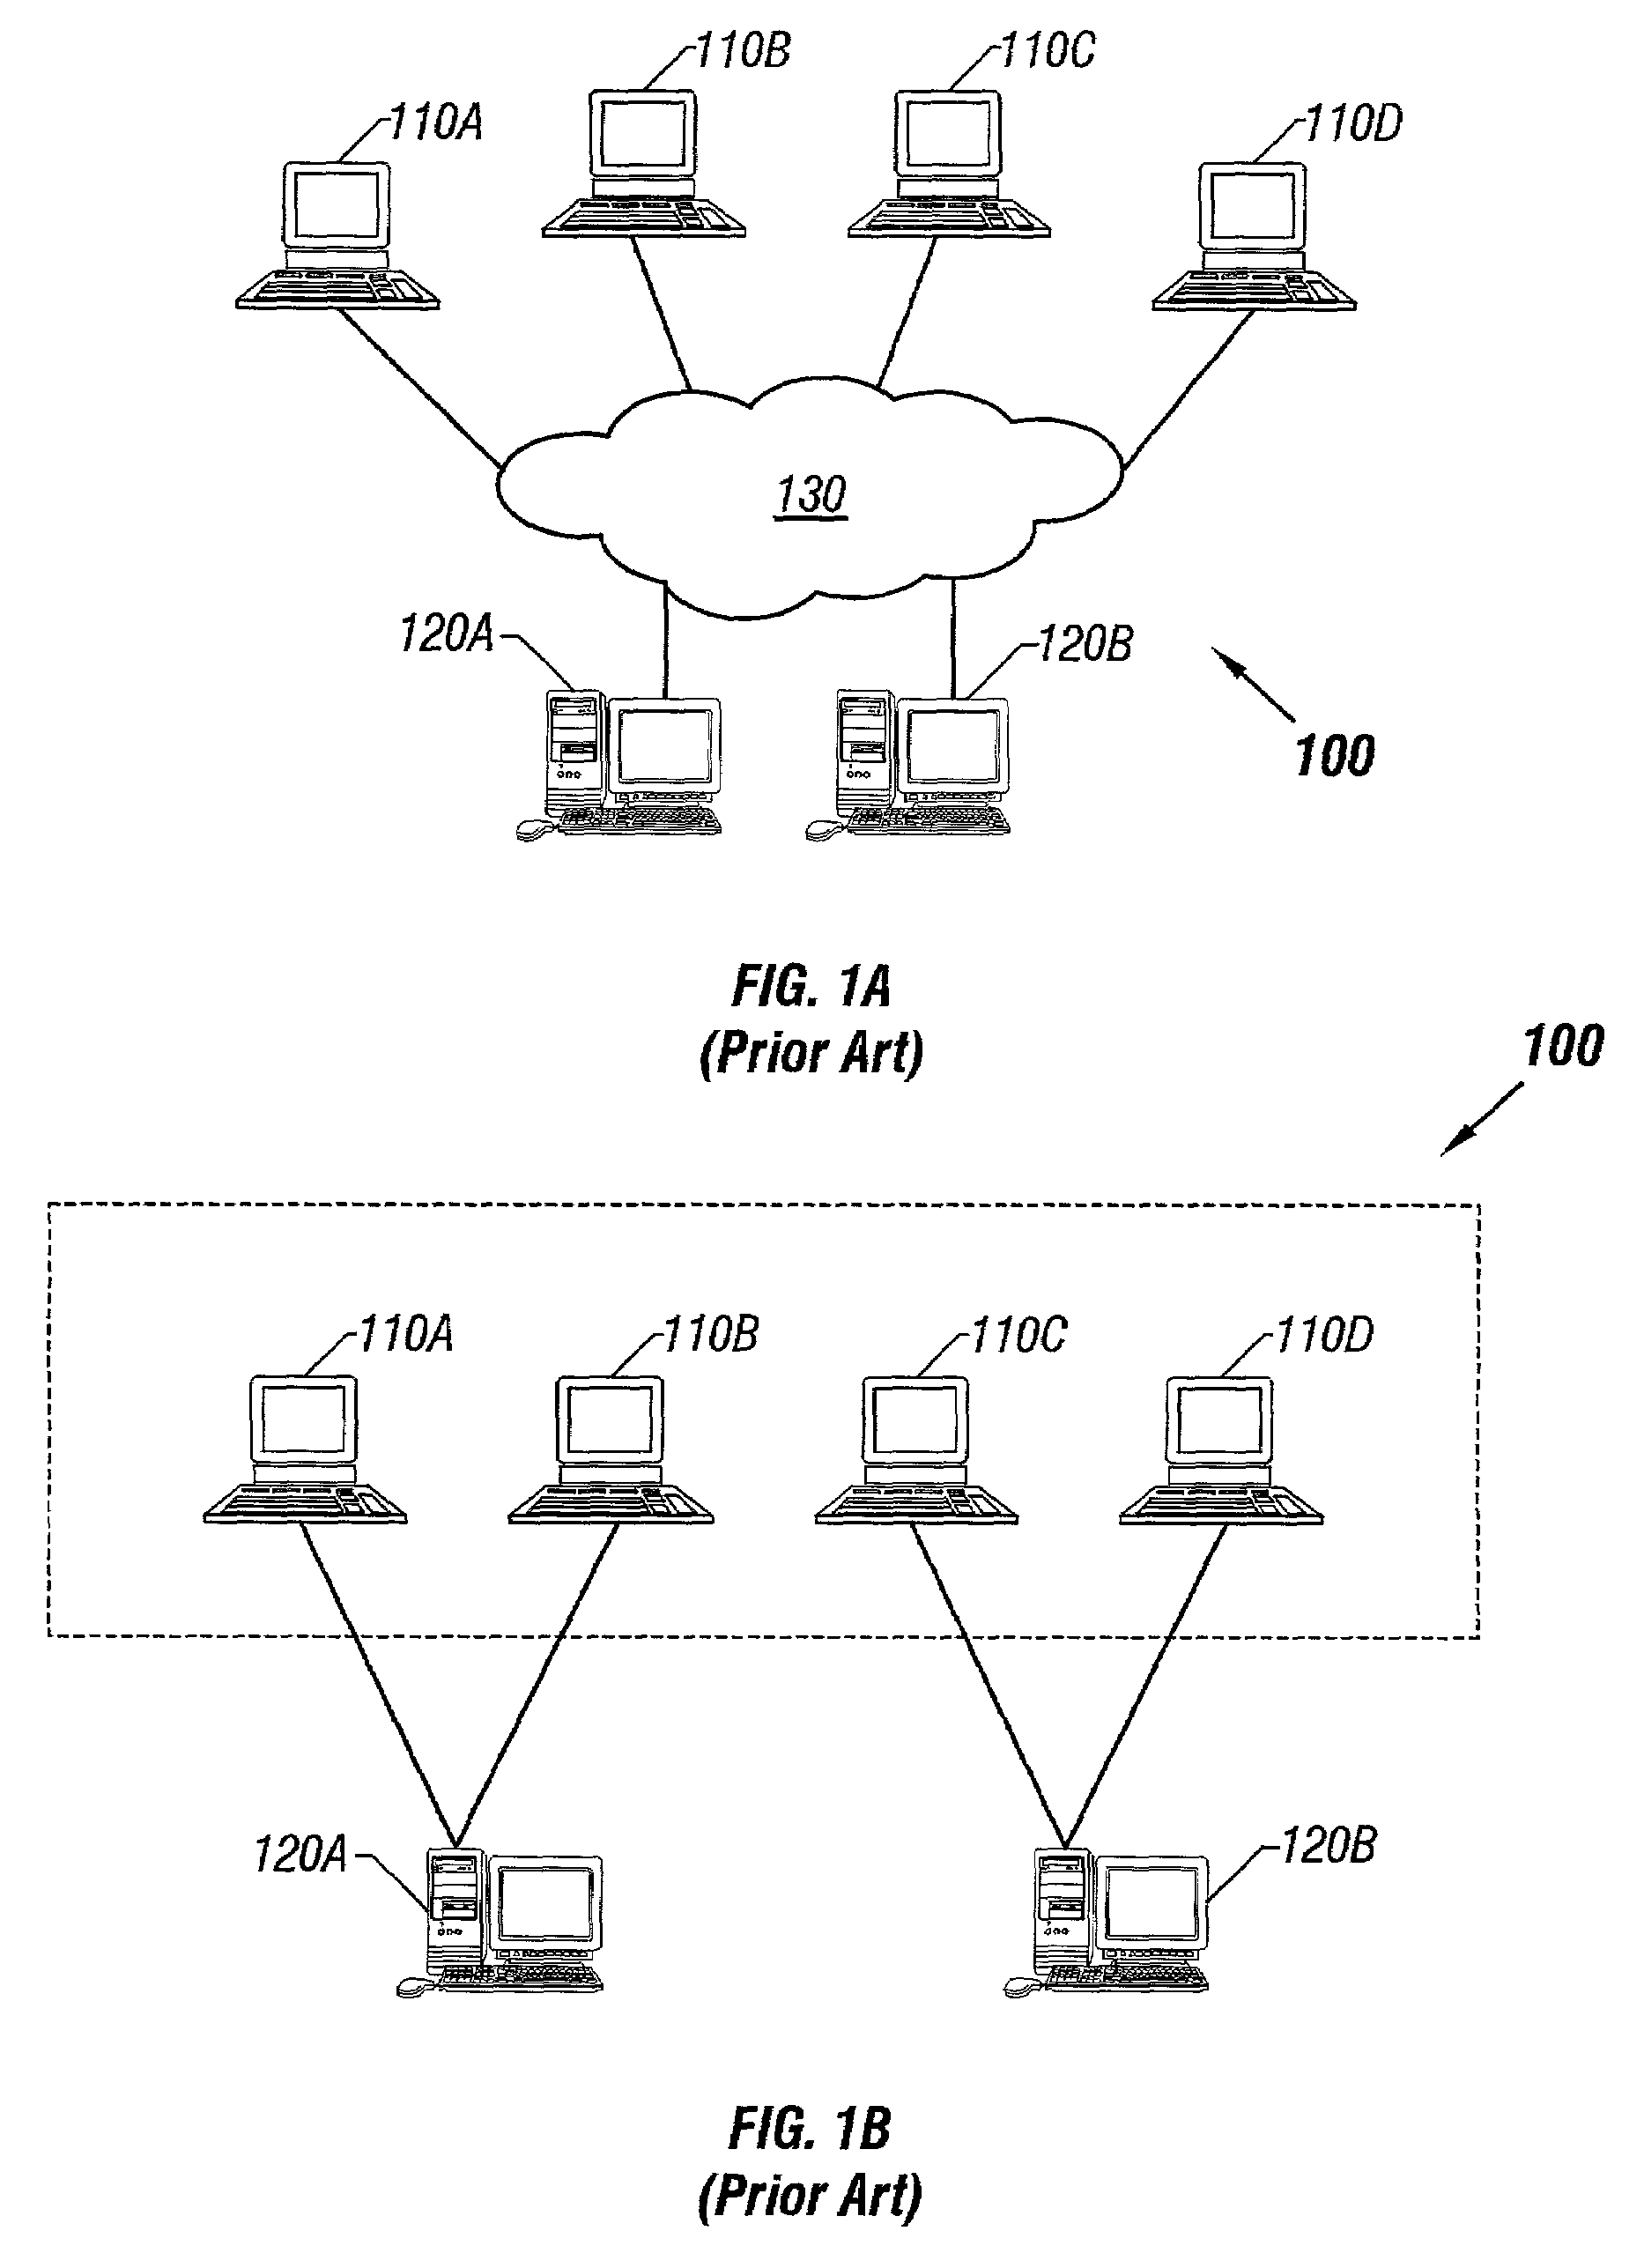 Fault-tolerant distributed system for collaborative computing